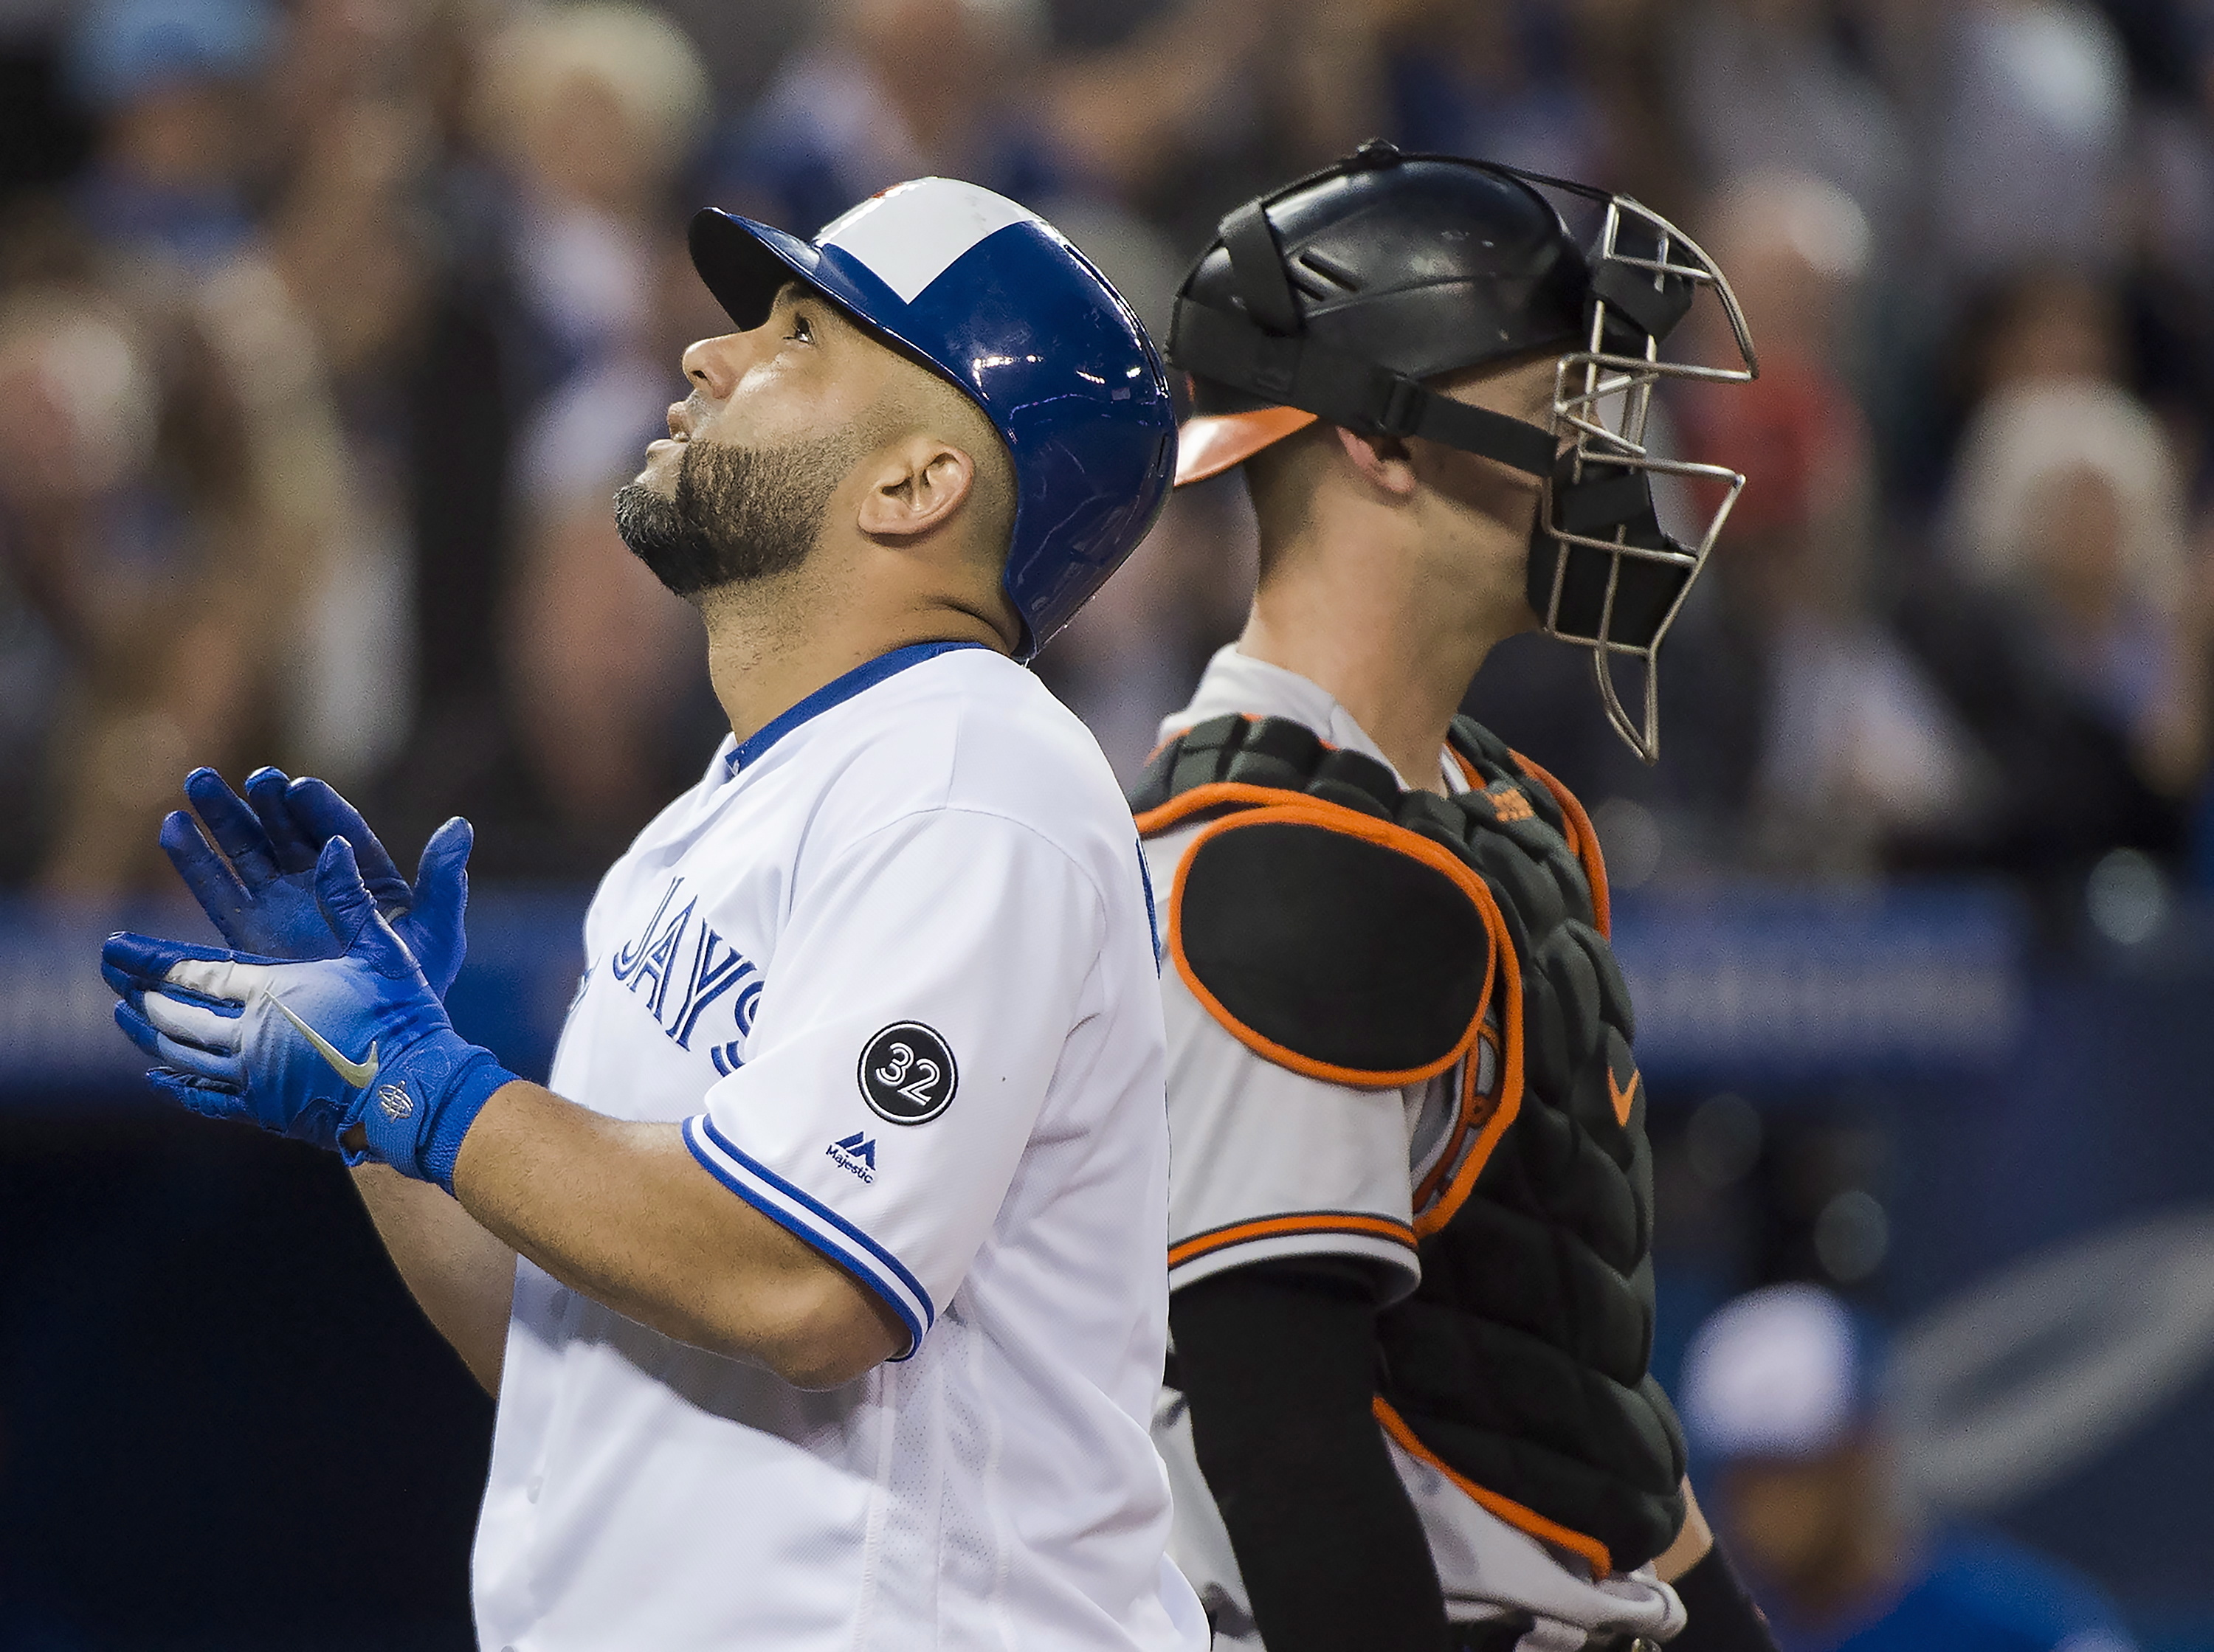 Morales hits two home runs as Blue Jays beat Orioles 5-3